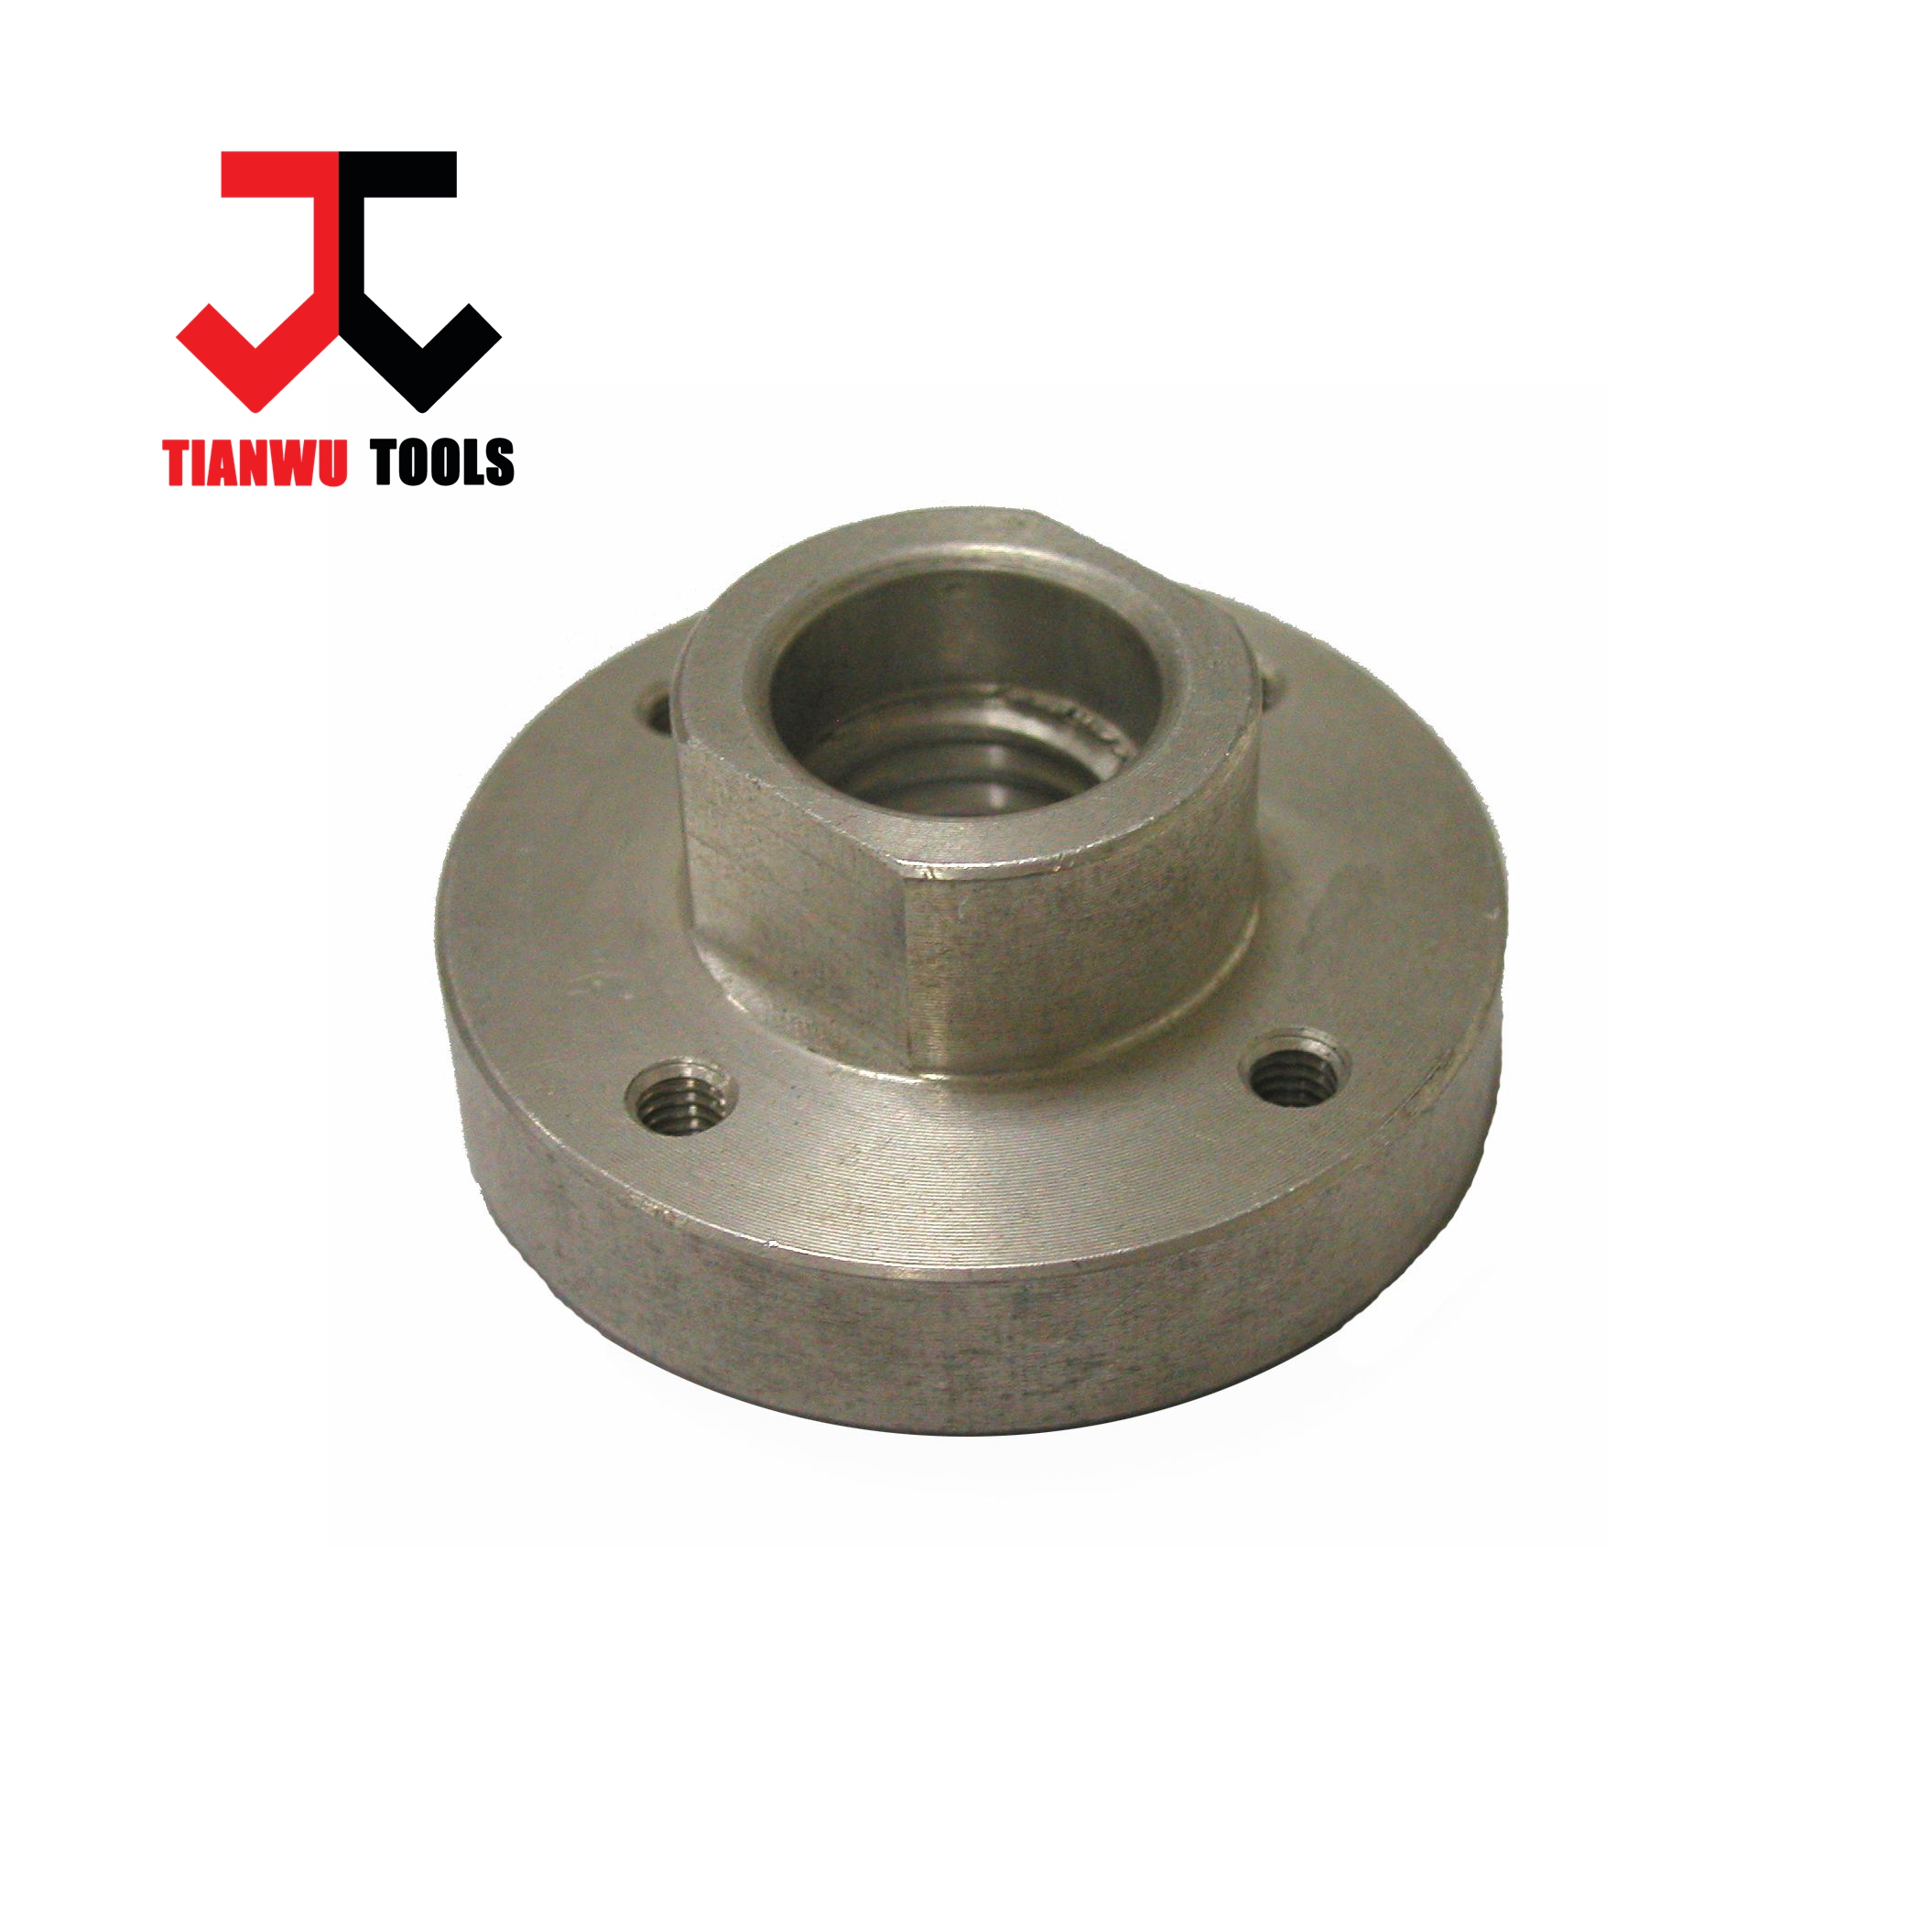 TW4218 Flange of the saw blade , M14 inner Flange joint for mini saw blade , Steel